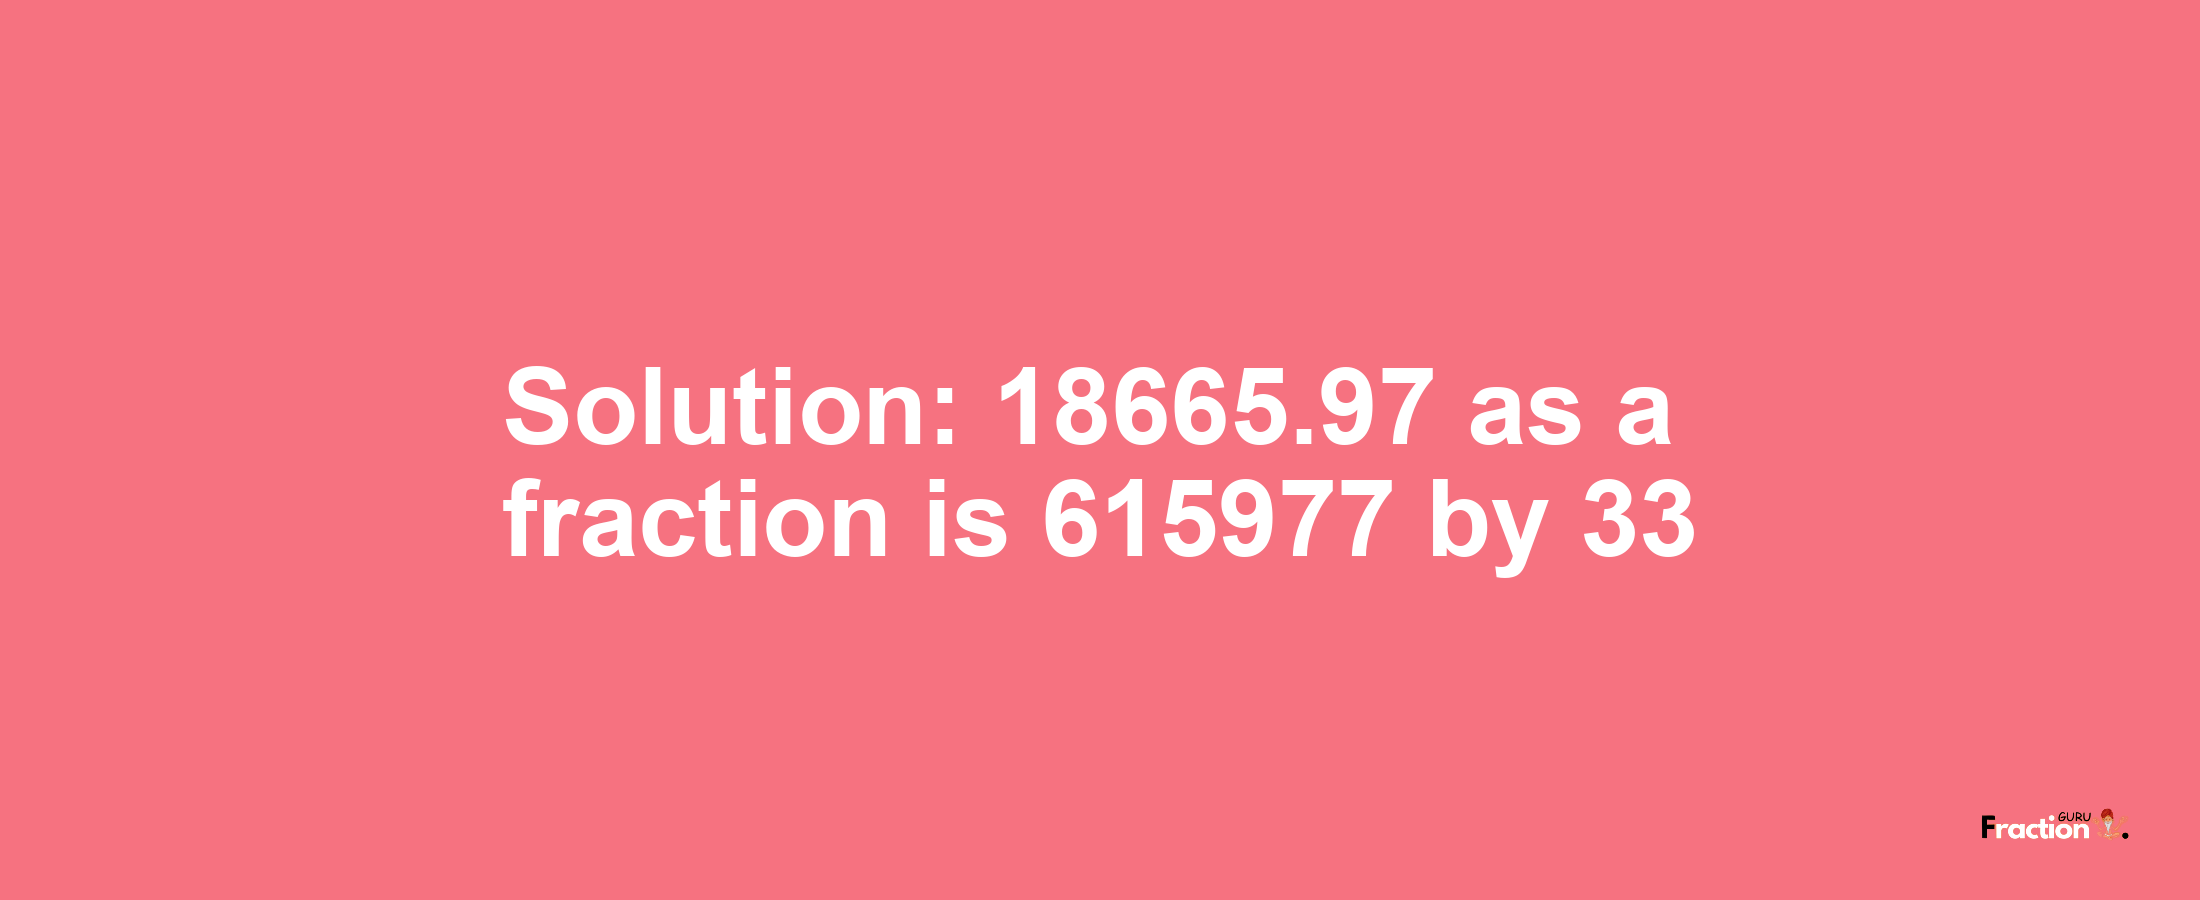 Solution:18665.97 as a fraction is 615977/33